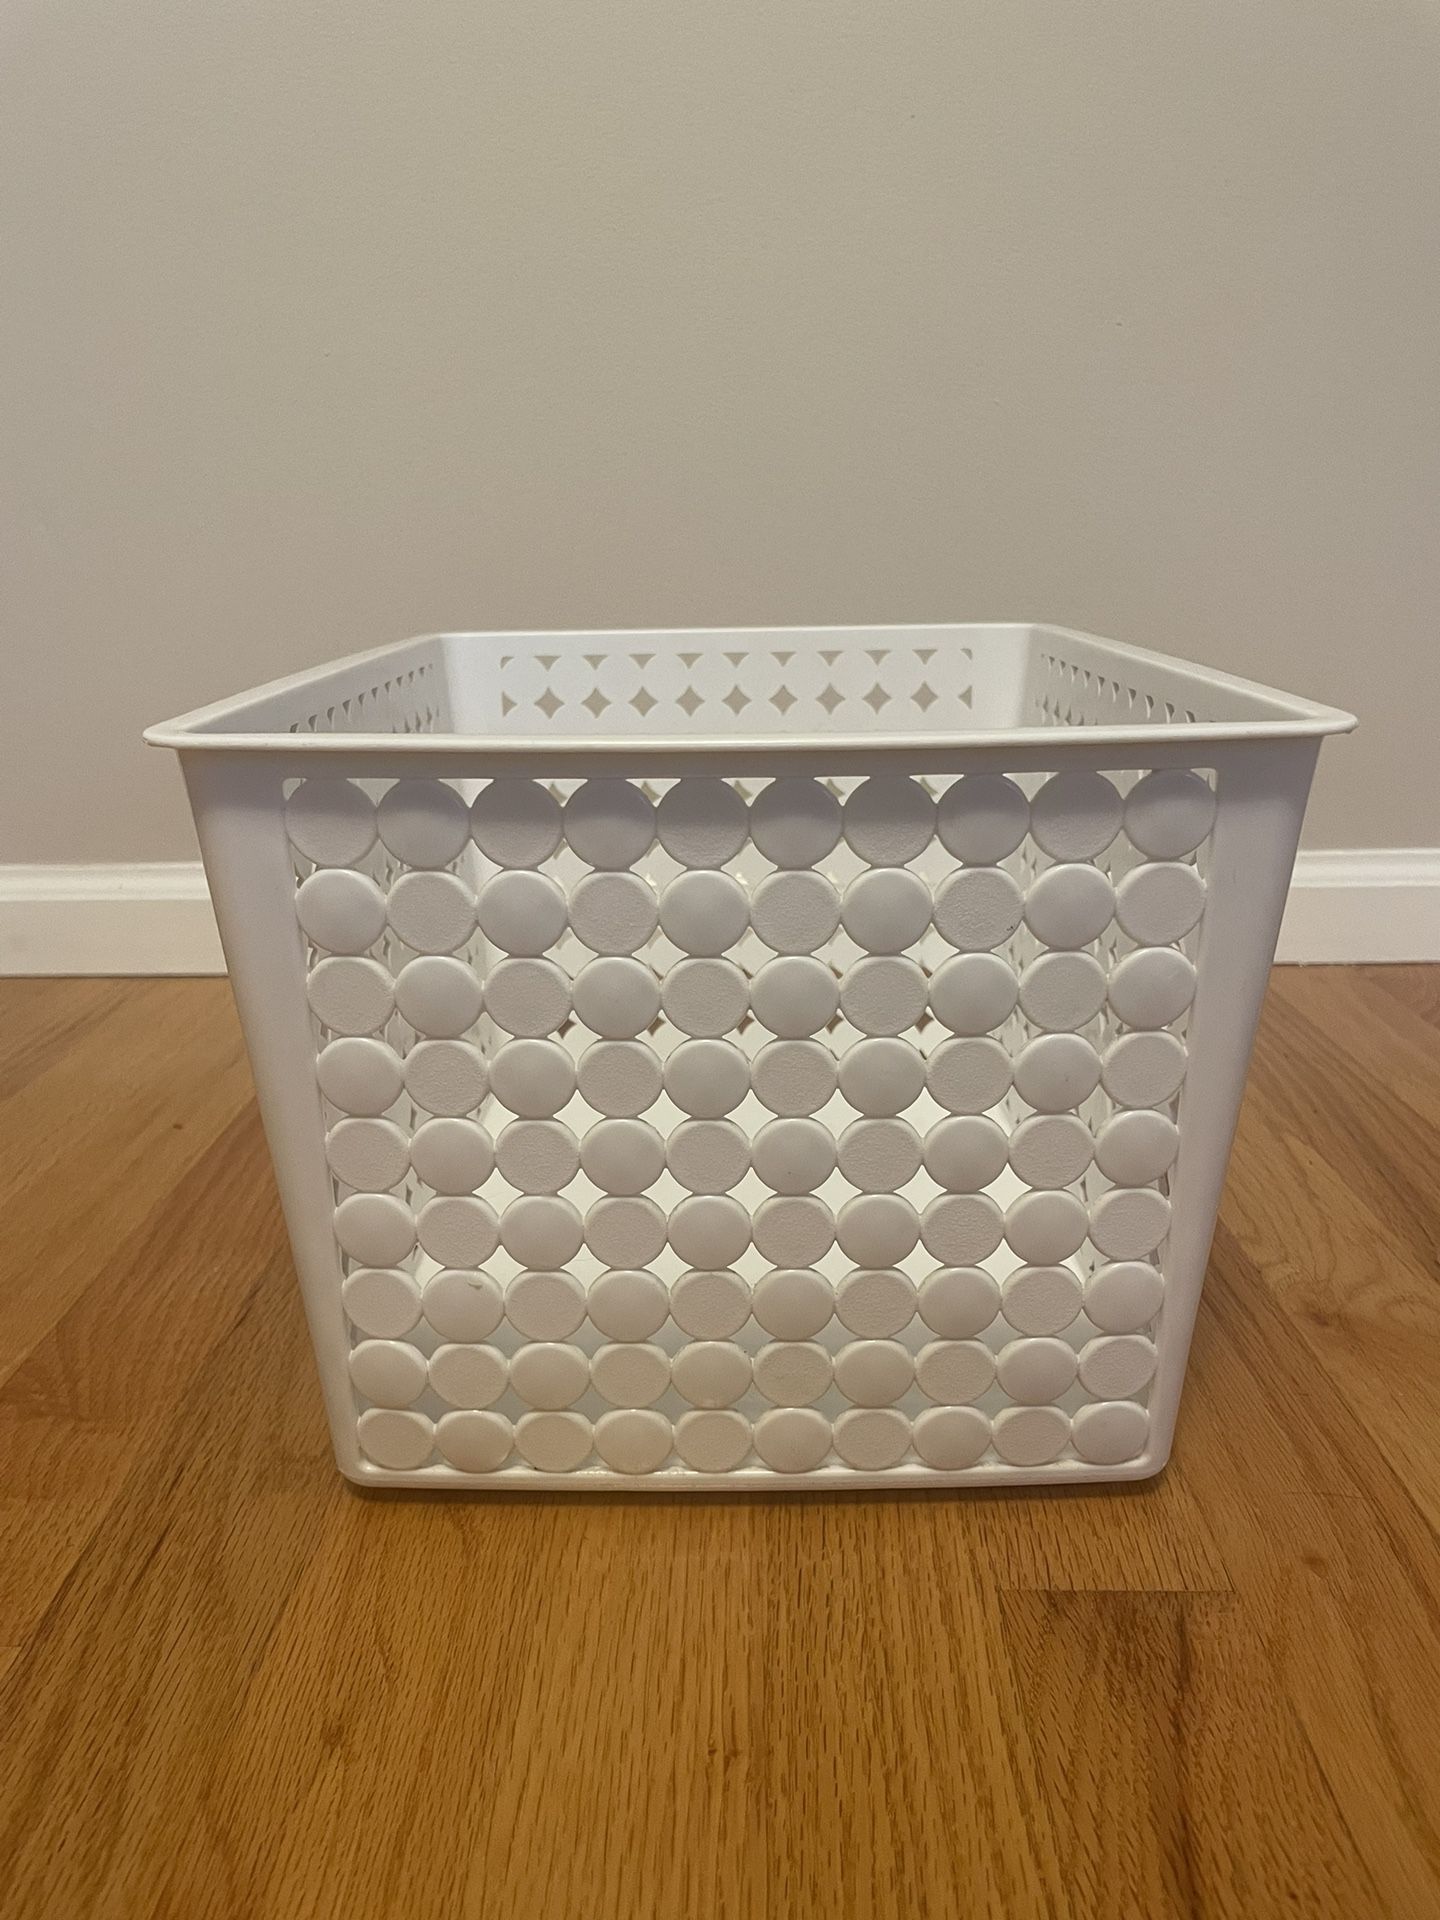 The Container Store - White Storage Basket 